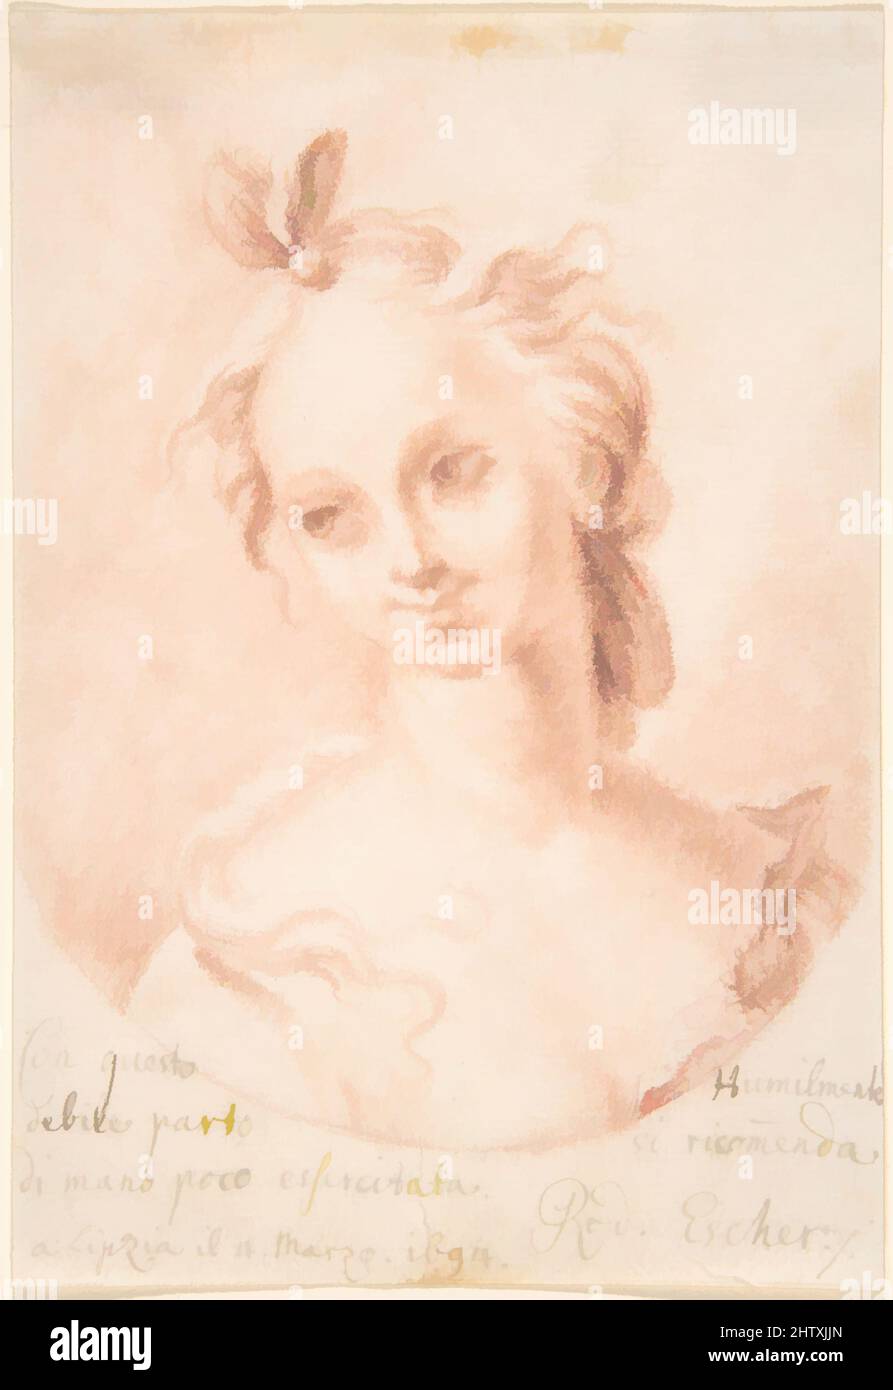 Art inspired by Head of a Girl, 1694, Red chalk, sheet: 5 7/16 x 3 5/8 in. (13.8 x 9.2 cm), Drawings, Rudolf Escher (Swiss, Zurich 1662–1721 Zurich, Classic works modernized by Artotop with a splash of modernity. Shapes, color and value, eye-catching visual impact on art. Emotions through freedom of artworks in a contemporary way. A timeless message pursuing a wildly creative new direction. Artists turning to the digital medium and creating the Artotop NFT Stock Photo